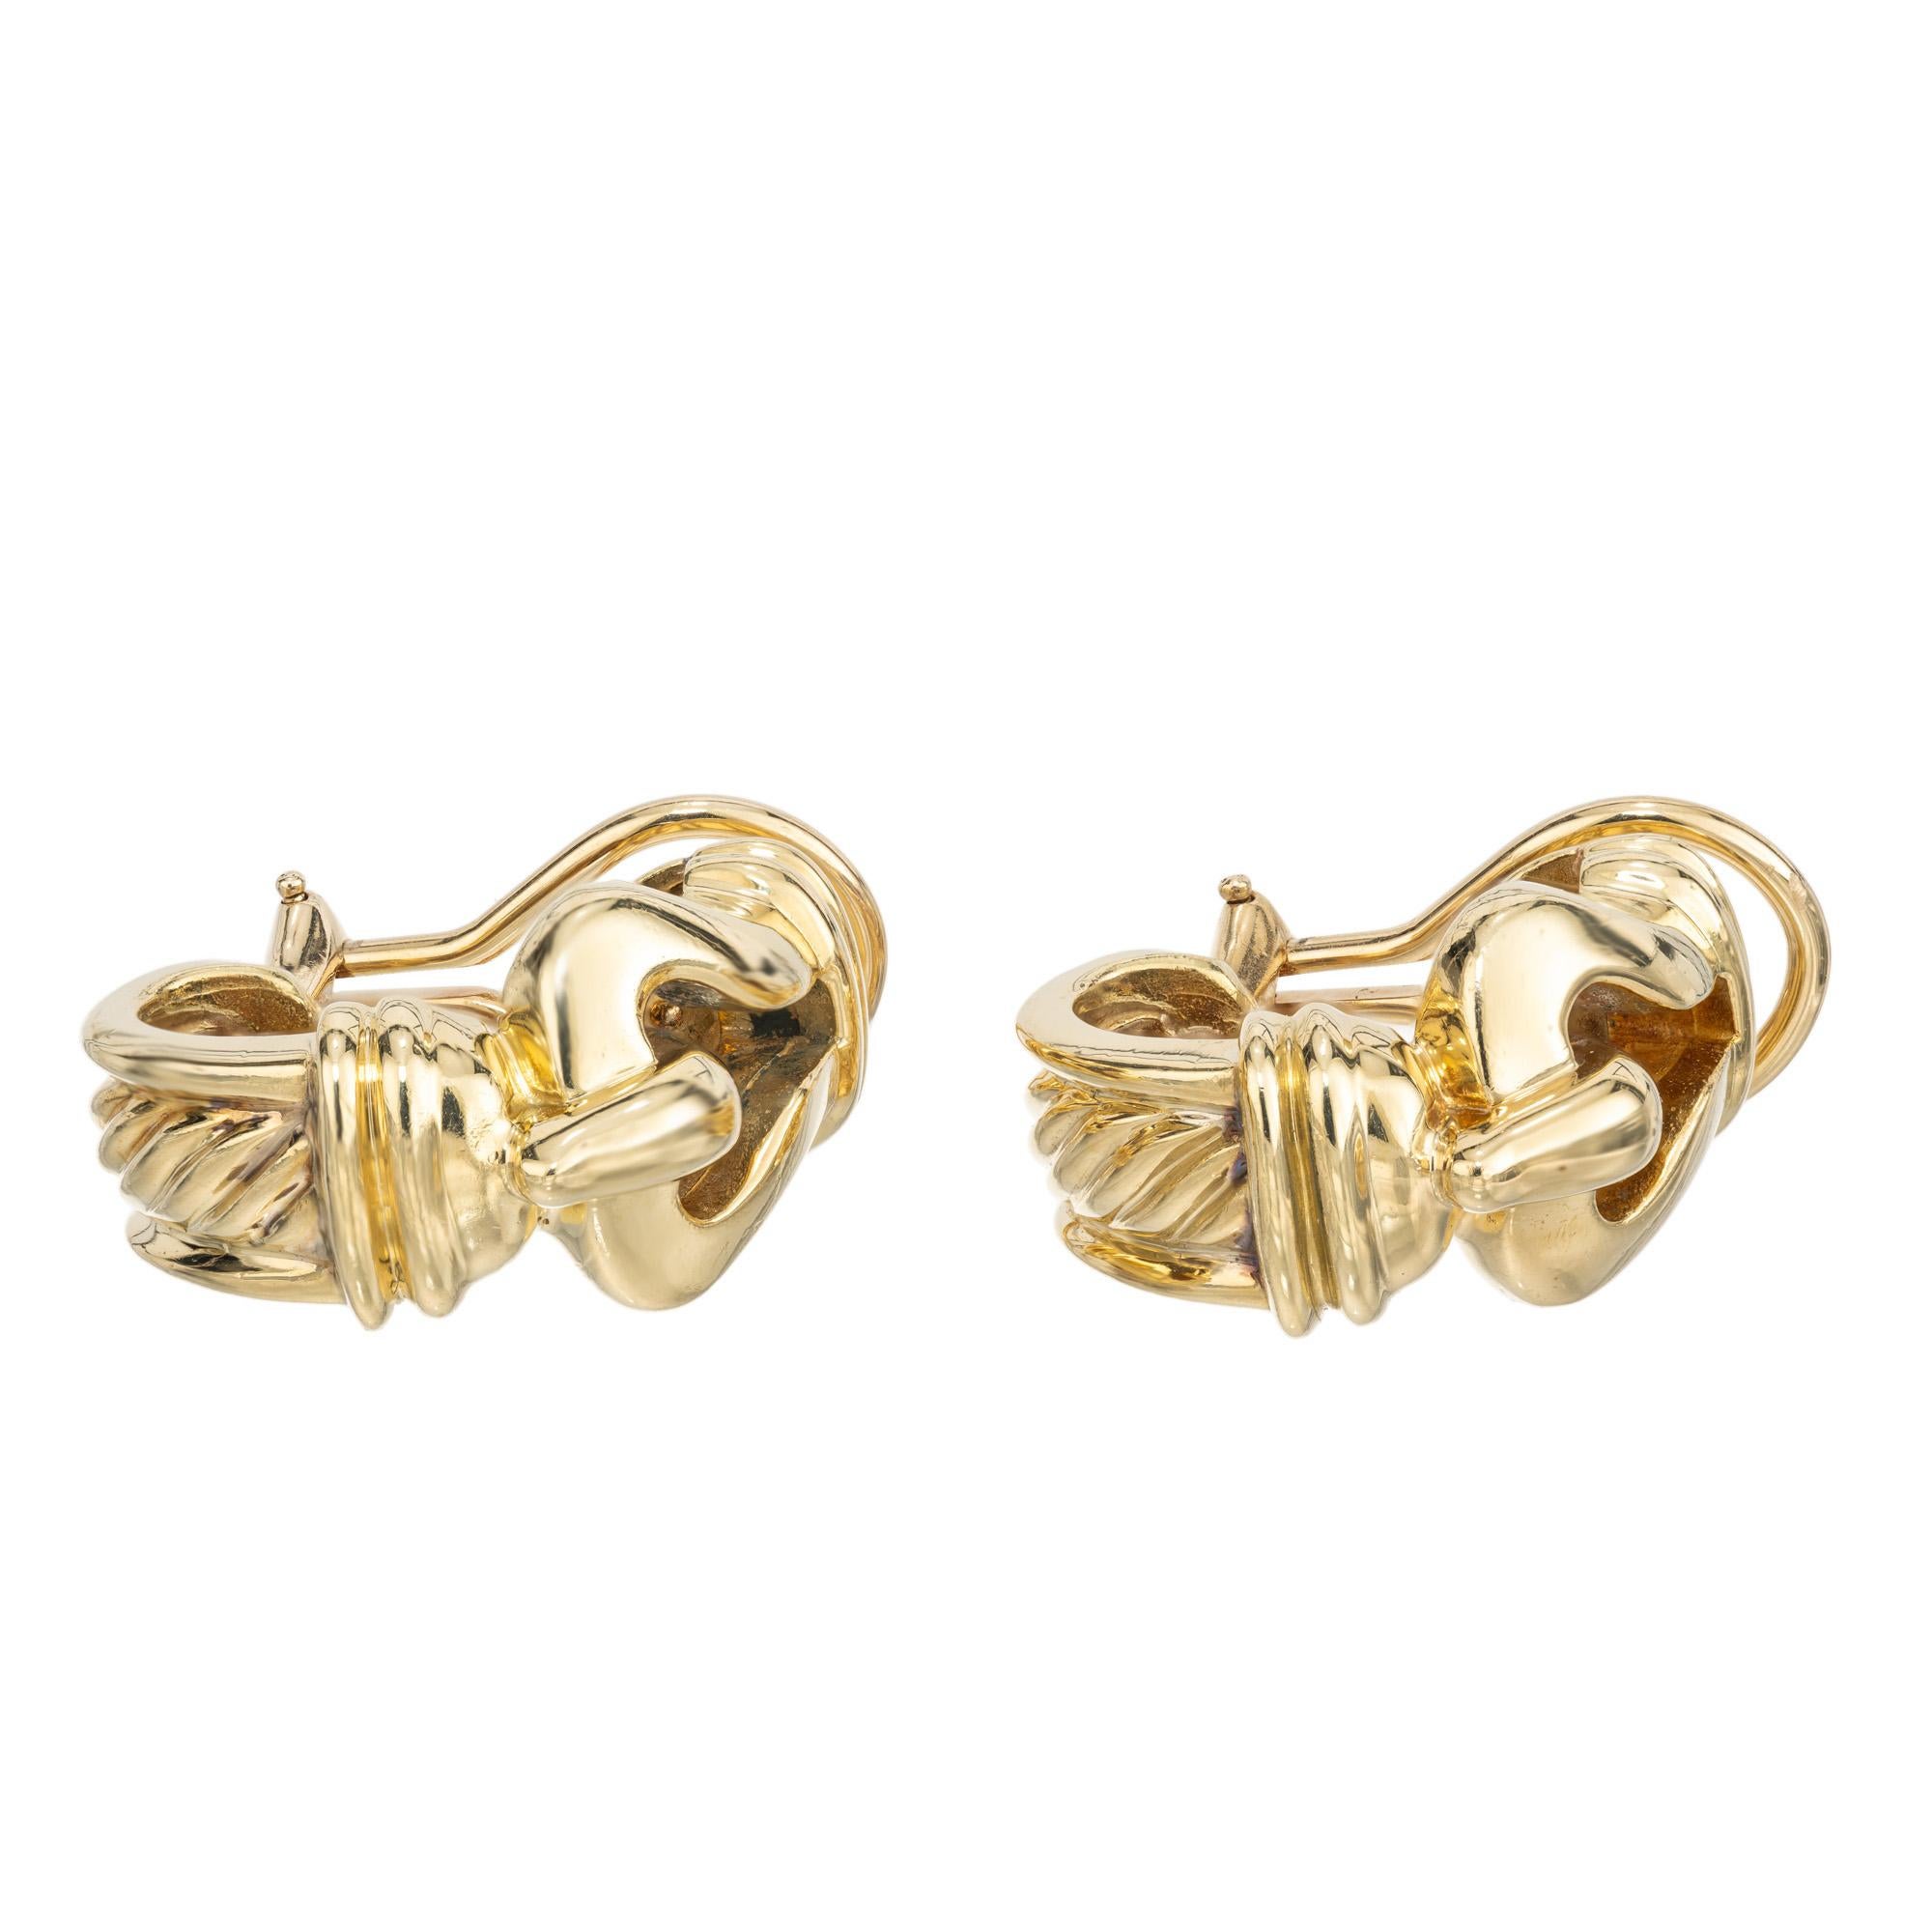 David Yurman Yellow Gold Buckle Earrings. Crafted in 18k yellow gold, the lever back earrings features Yurman's distinctive buckle design. These earrings are the perfect accessory for both formal occasions and everyday wear. Beautifully crafted and